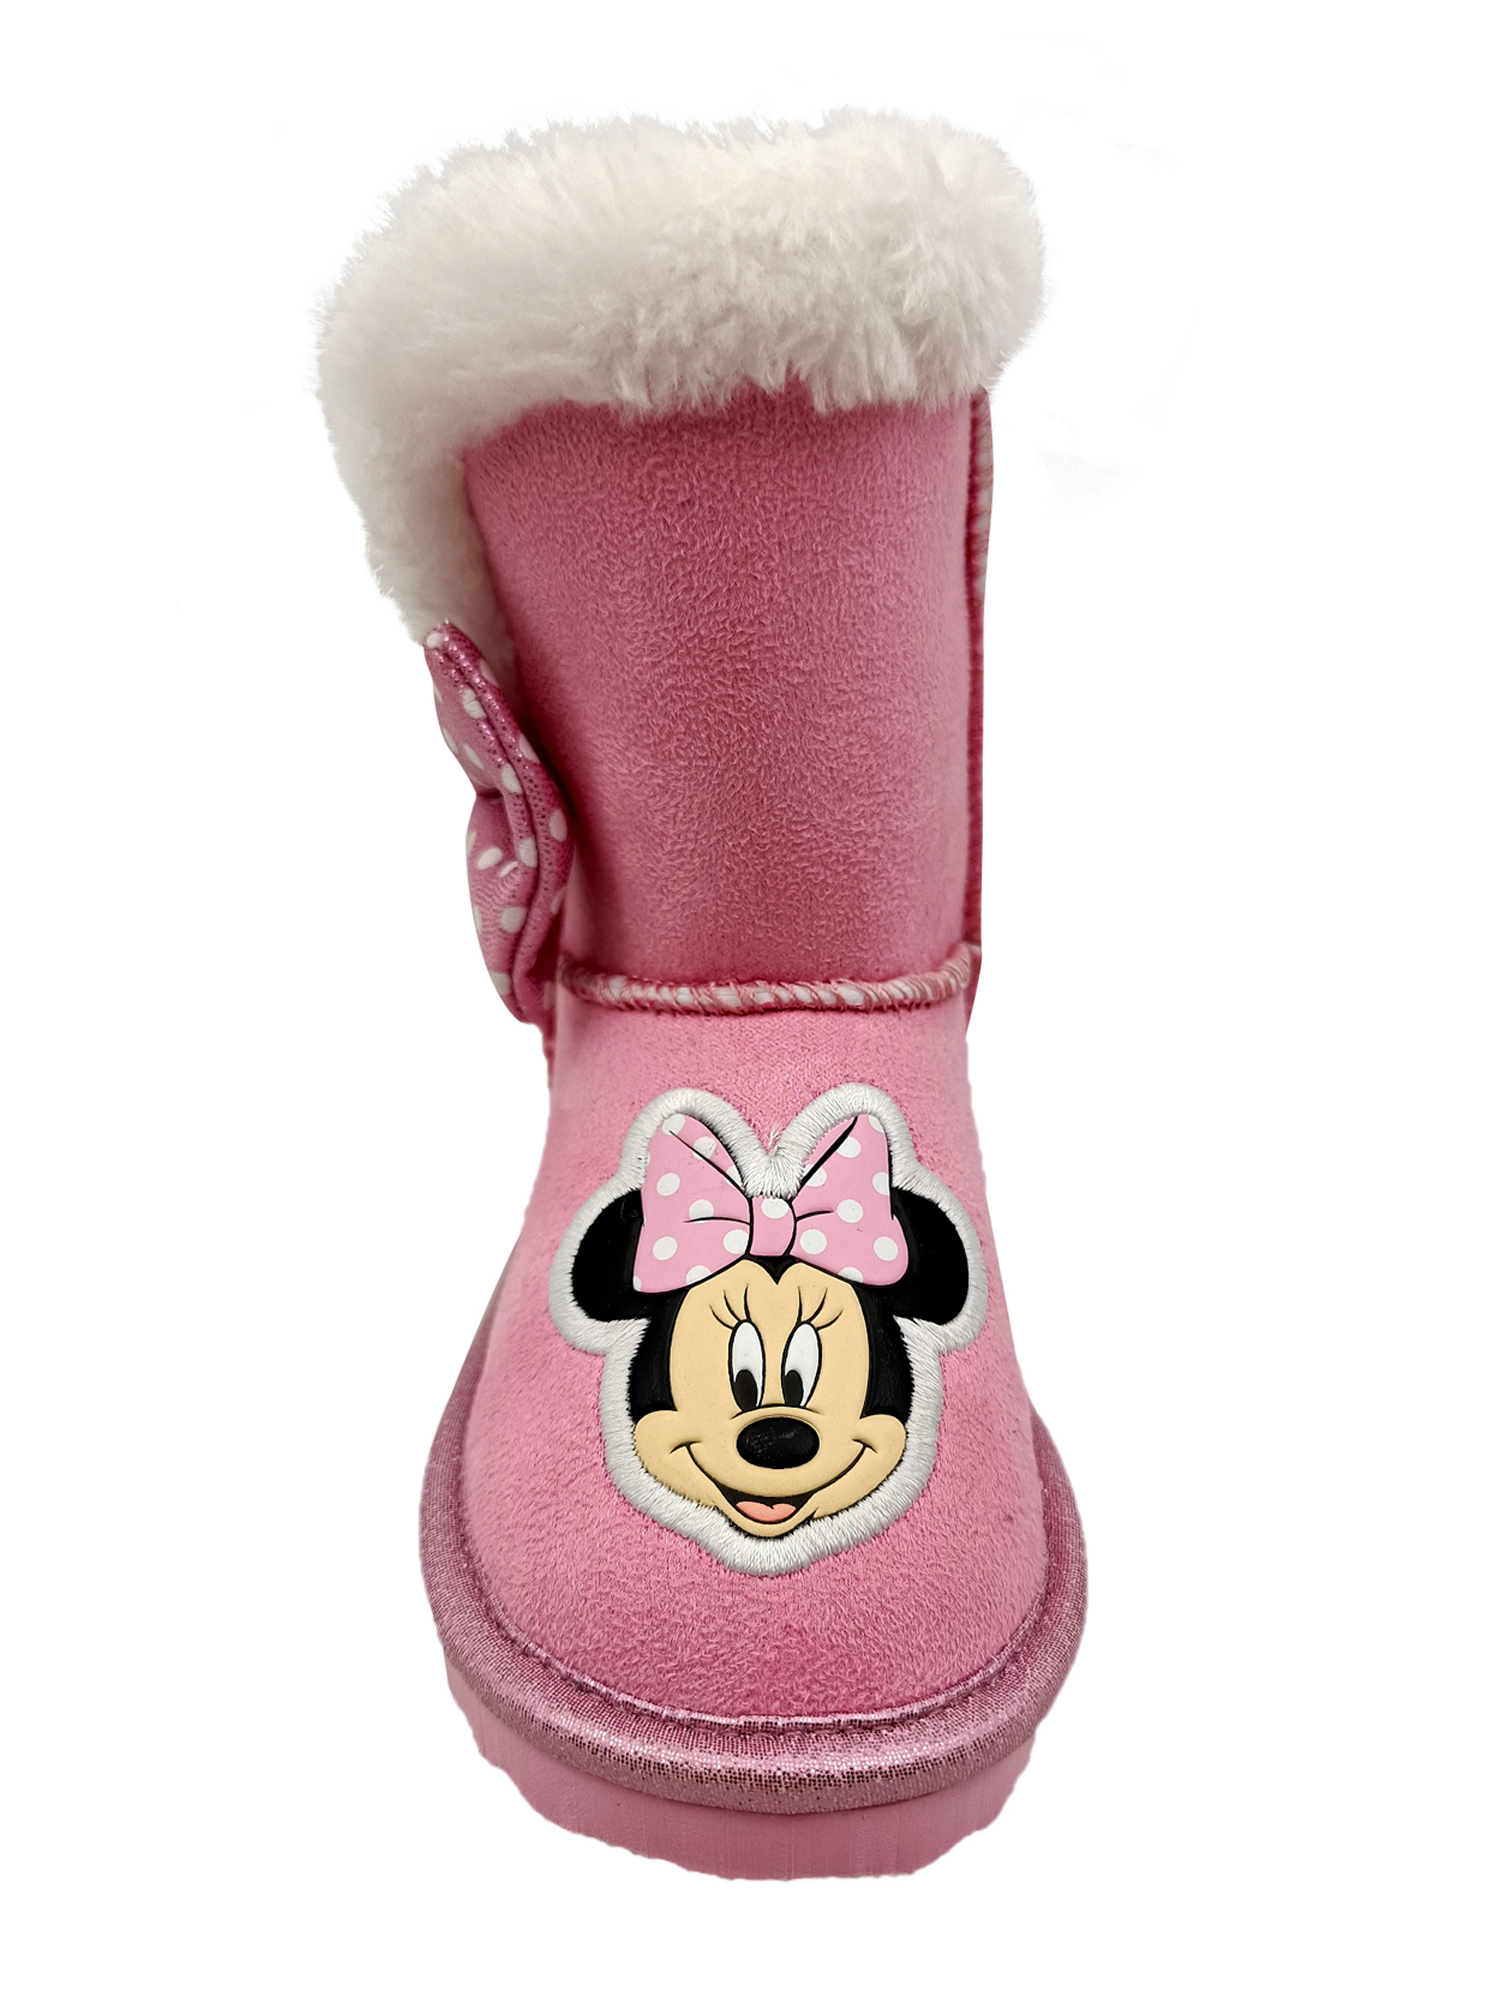 Disney Minnie Mouse Cozy Faux Shearling Winter Boot (Toddler Girls) - image 5 of 6